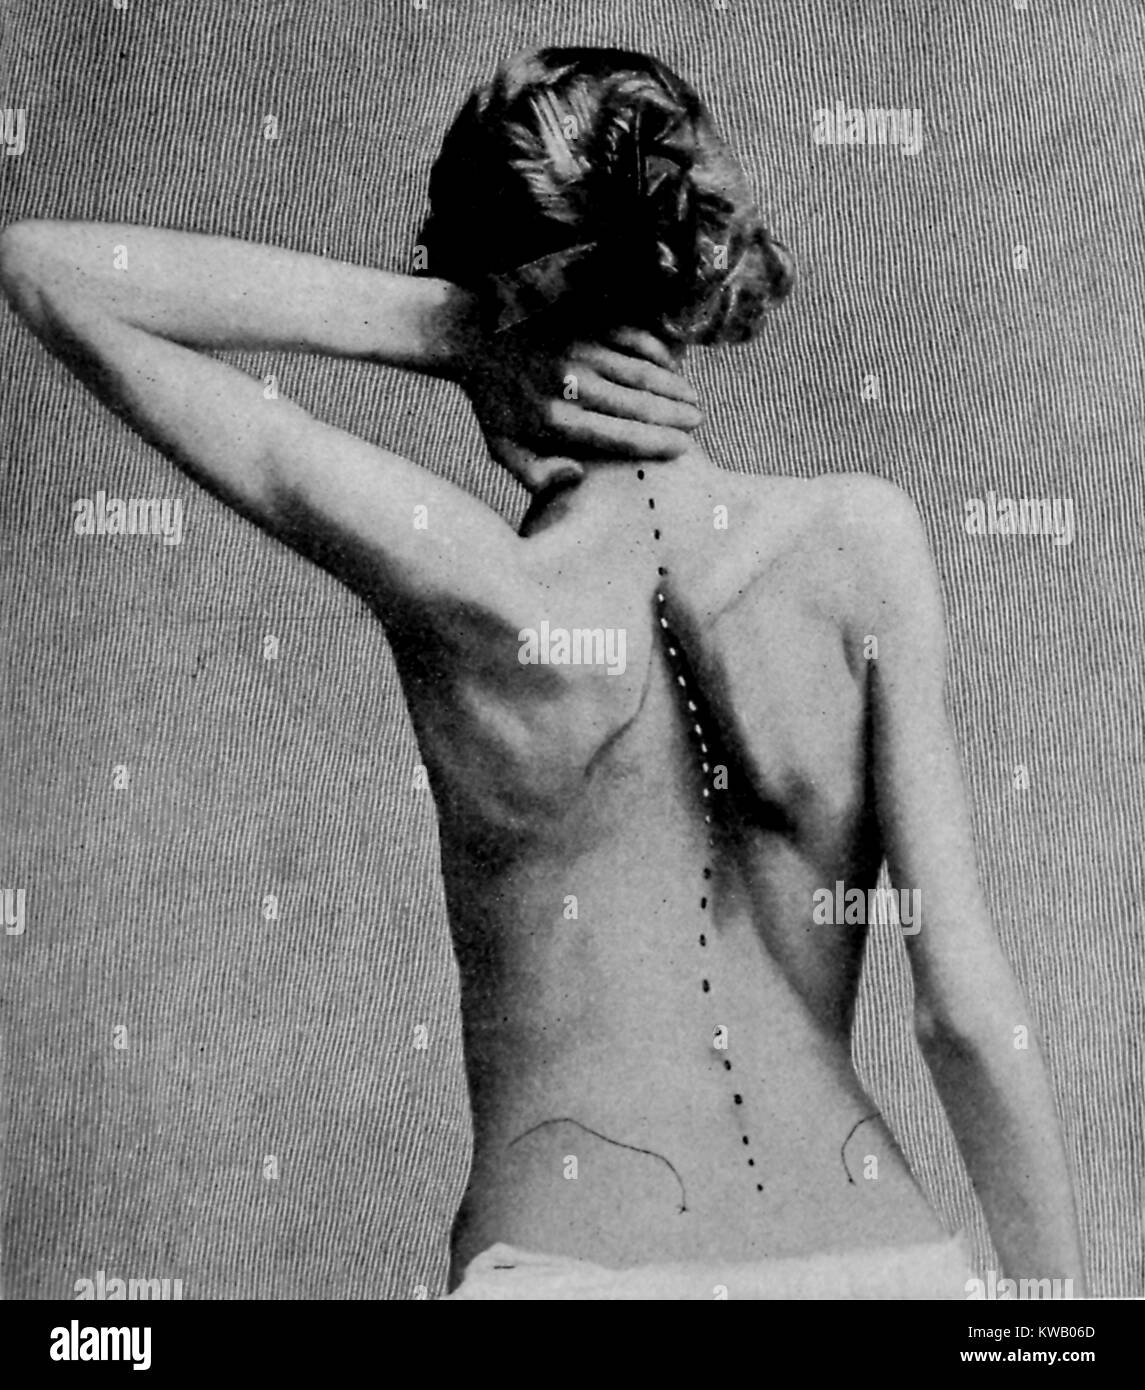 Medical illustration depicting curvature of the spine, with a female patient viewed from behind and a line on the back of the patient showing the spine's curved path, 1903. Courtesy Internet Archive. Stock Photo